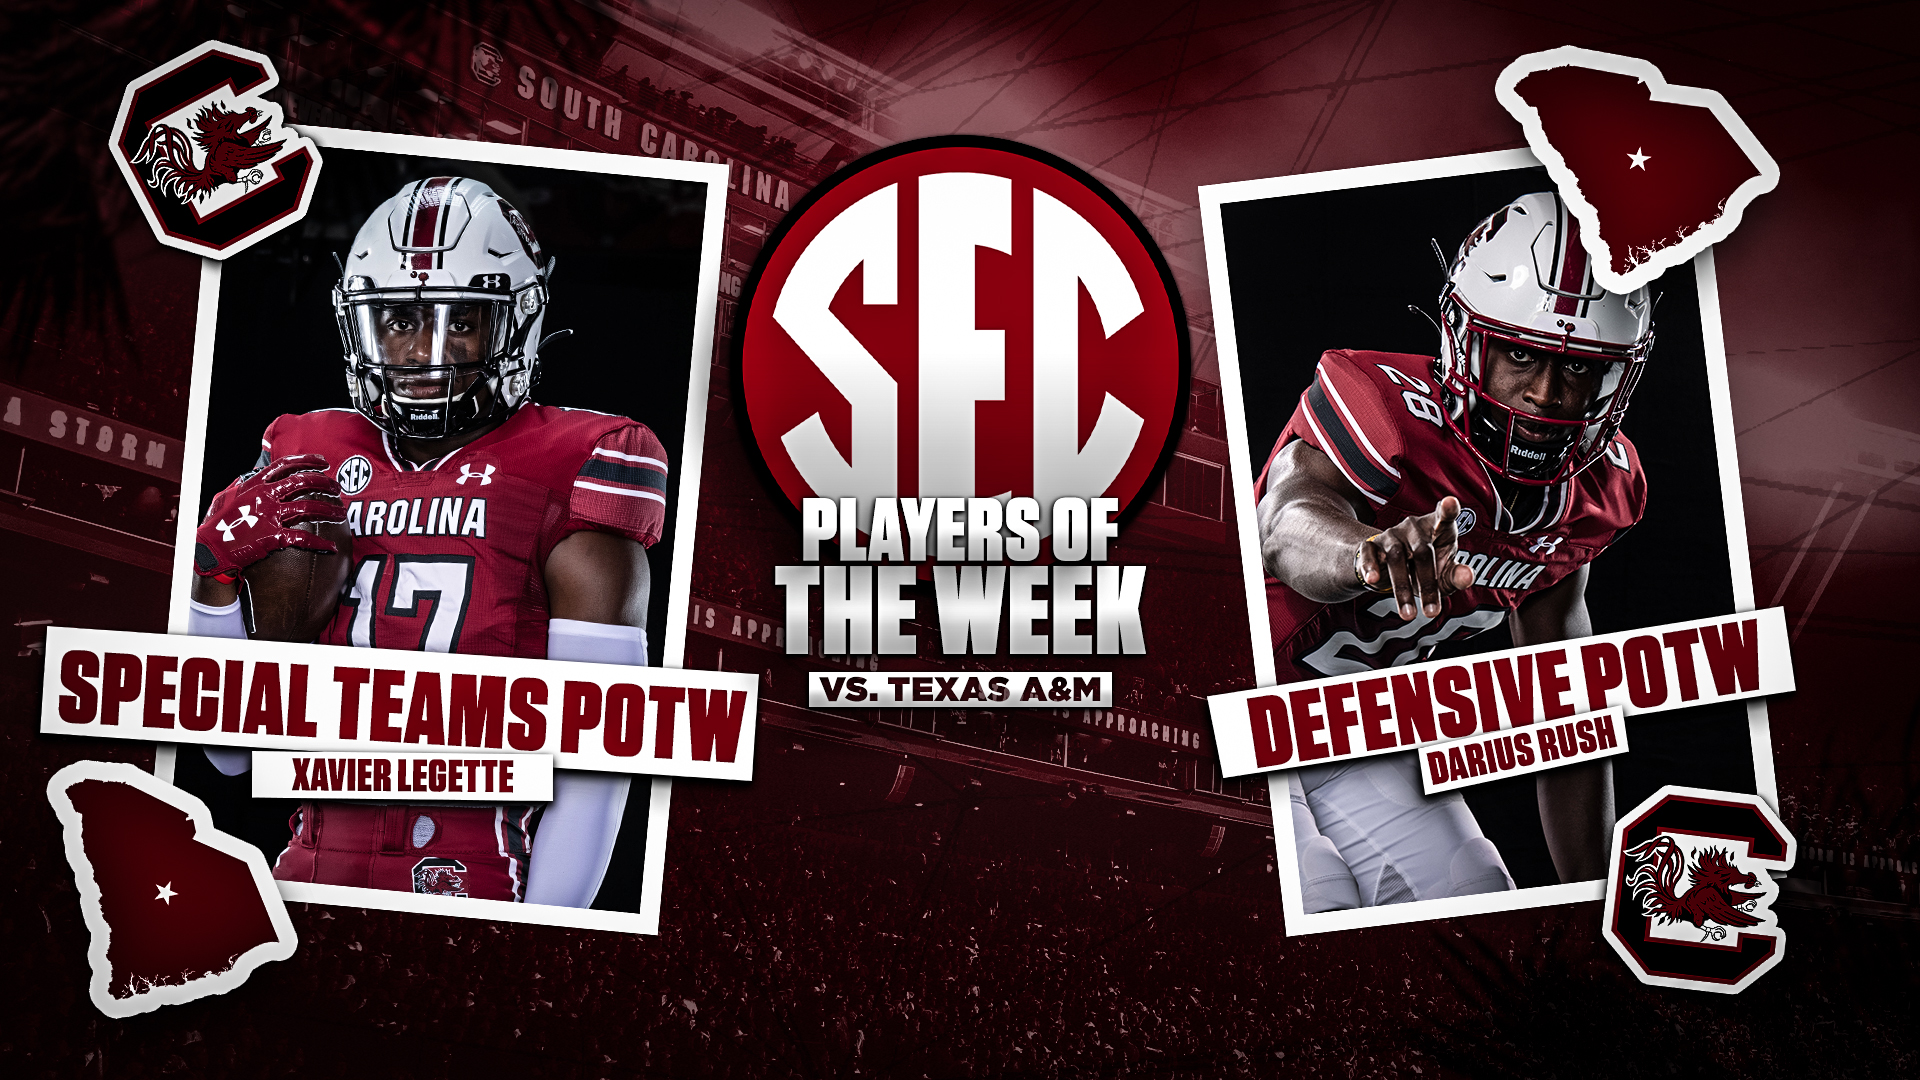 Rush and Legette Earn SEC Player of the Week Honors